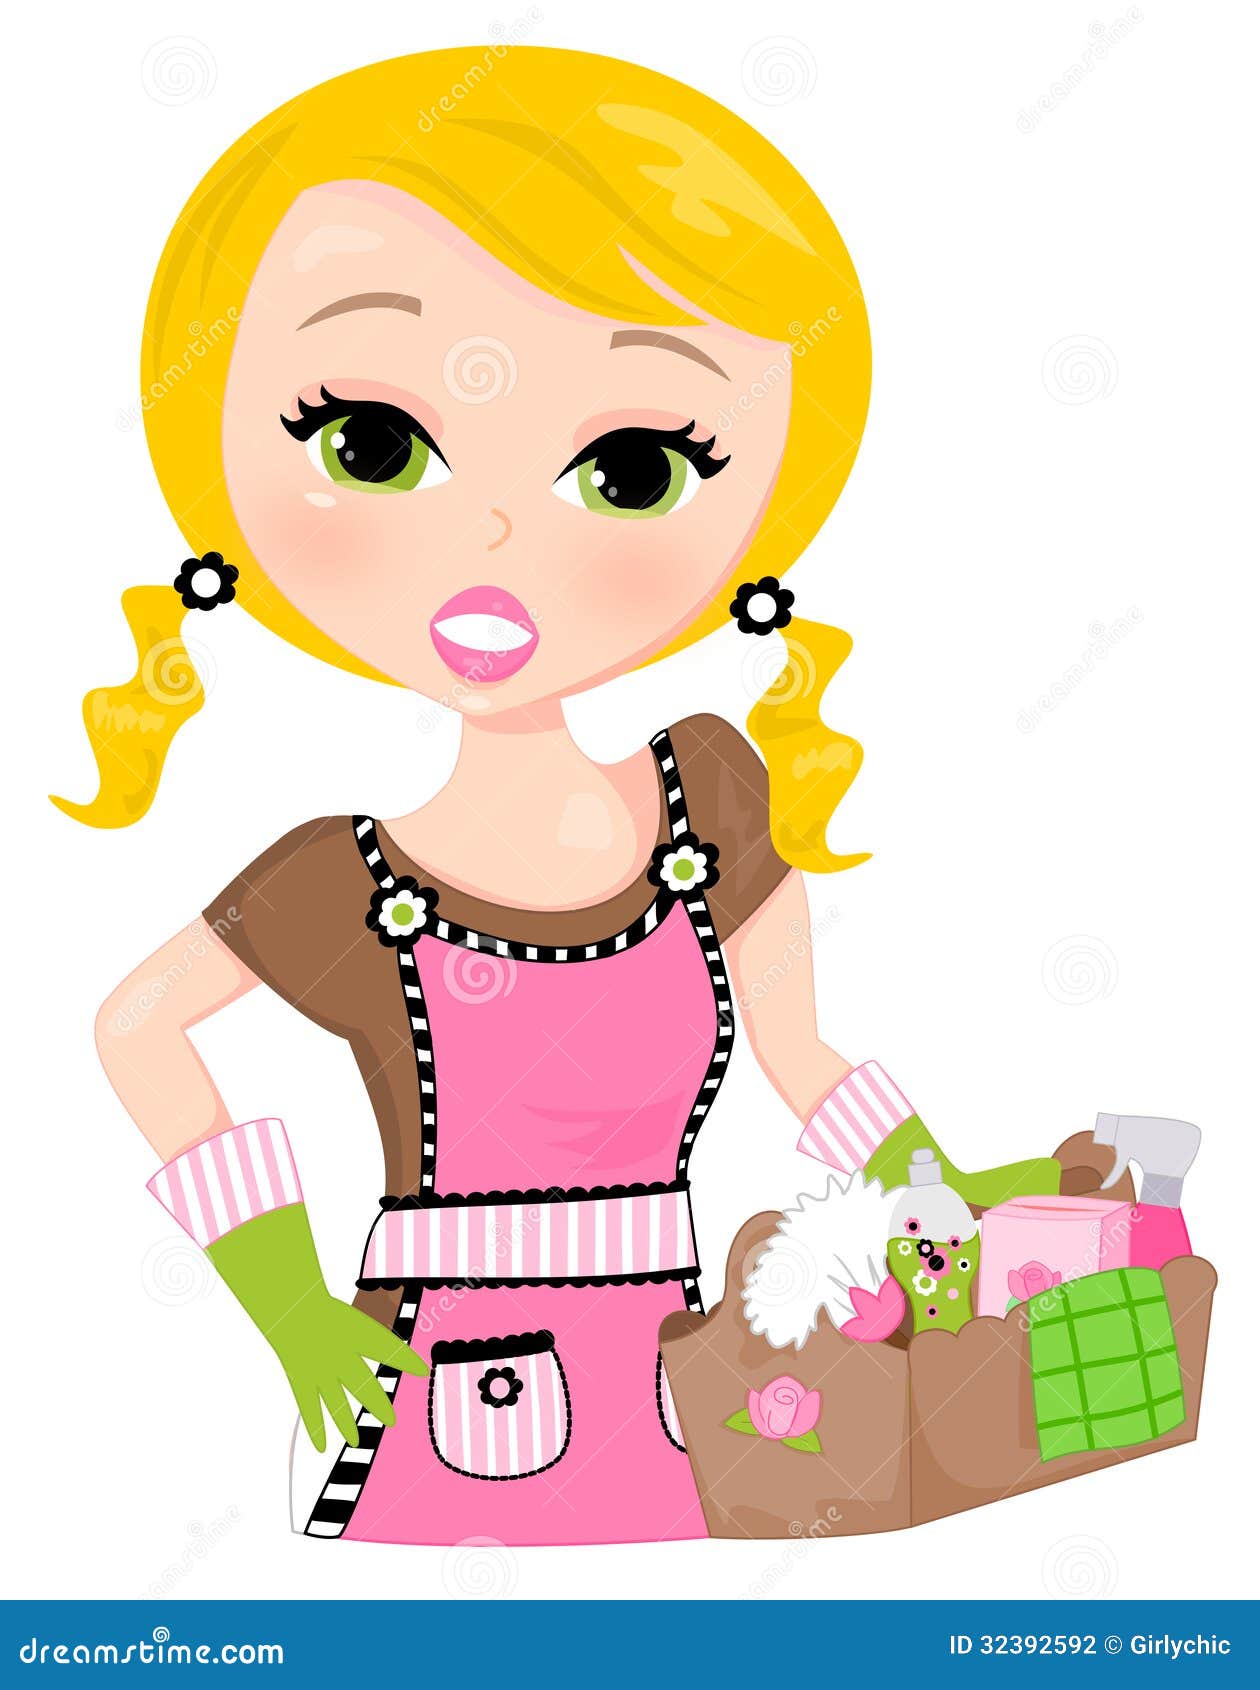 girl cleaning clipart - photo #48